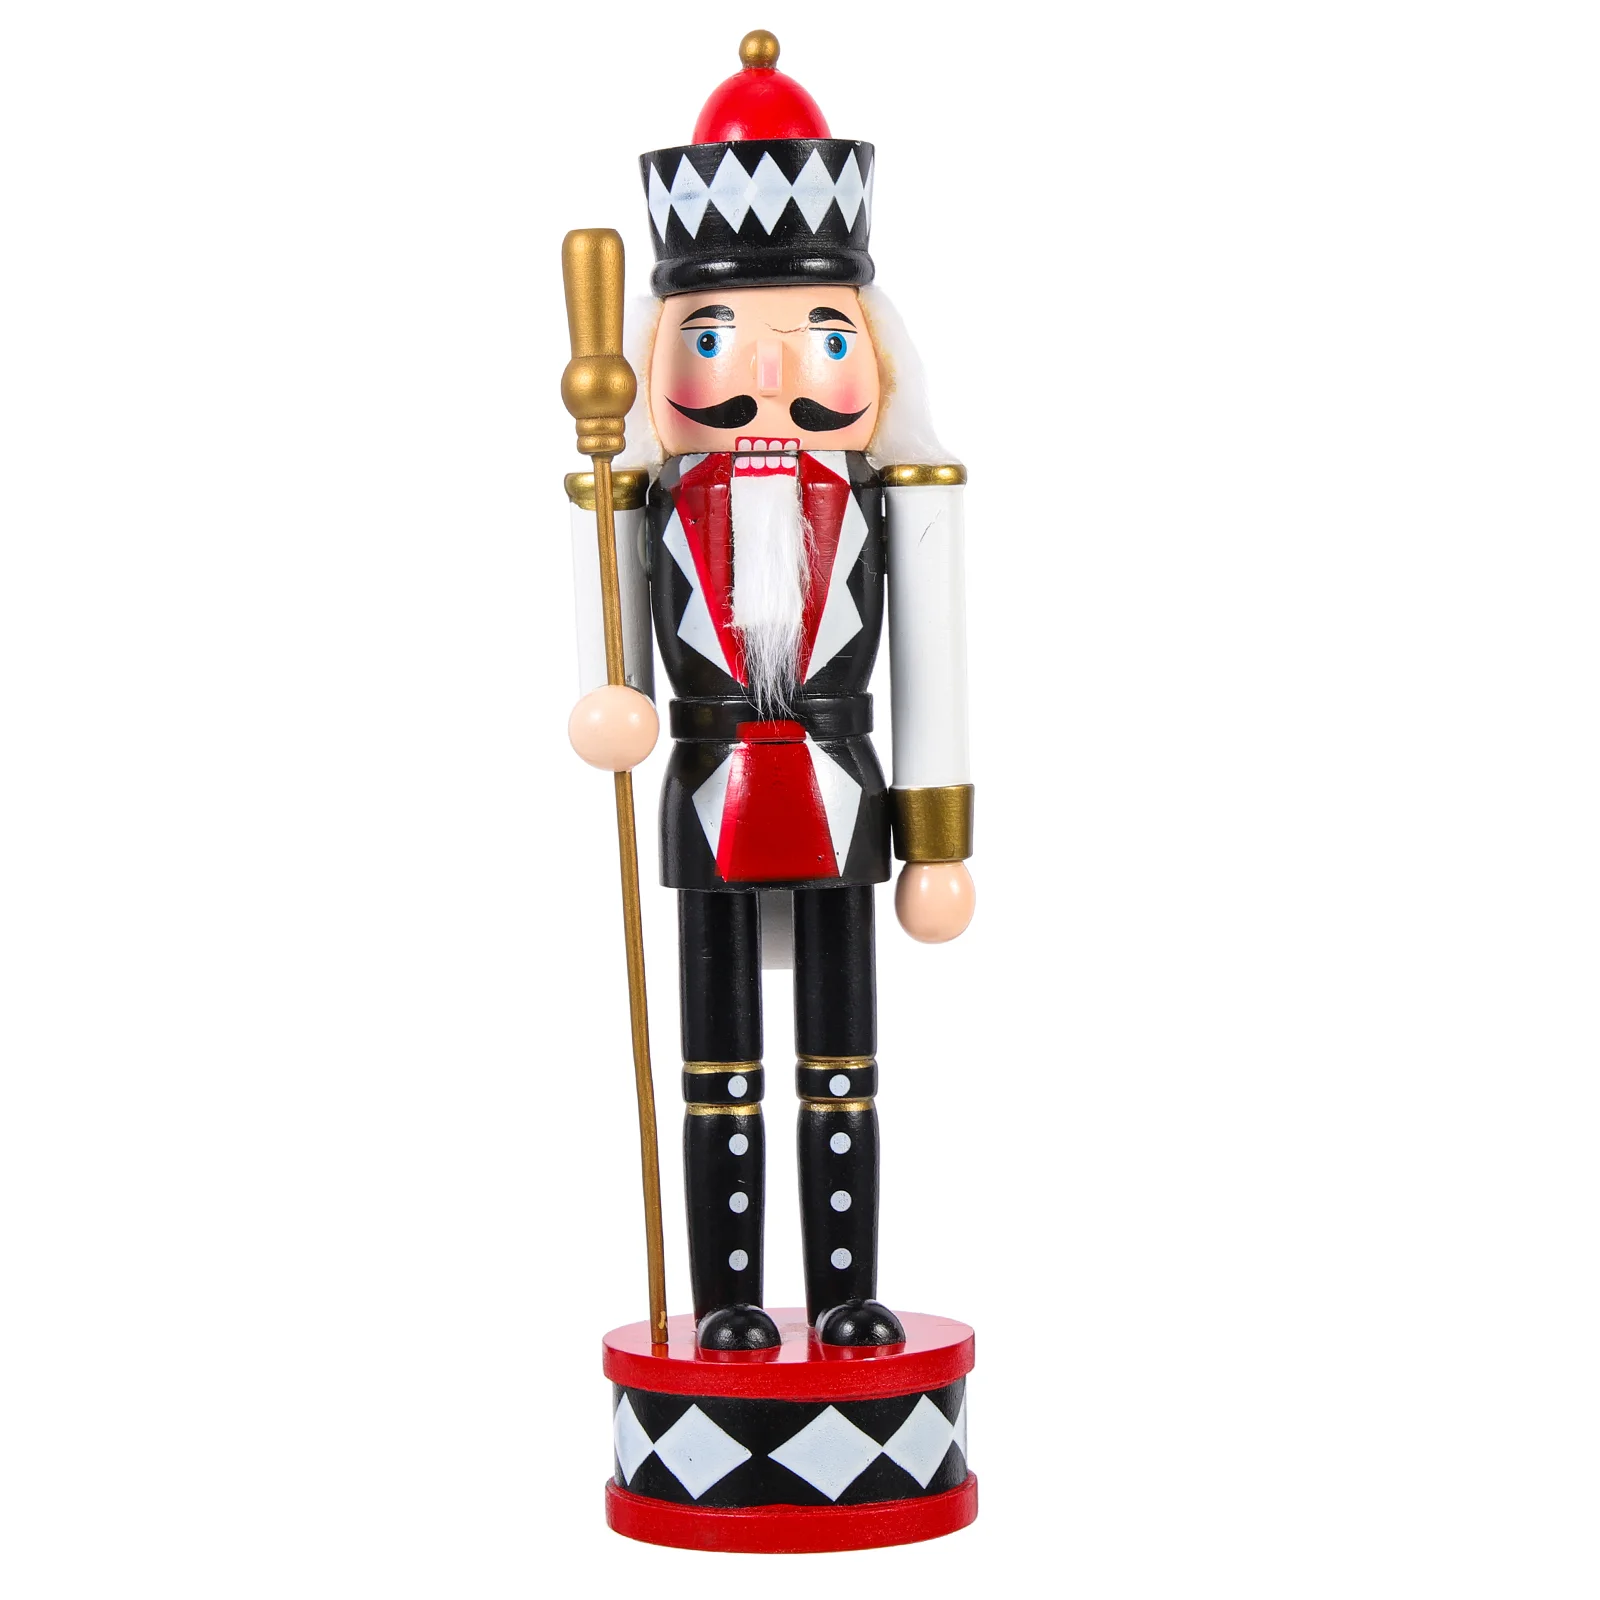 

Standing Drum Nutcracker Wood Craft Outdoor Christmas Decorations Gift Wooden Puppet Xmas Nutcrackers Ornament Tabletop